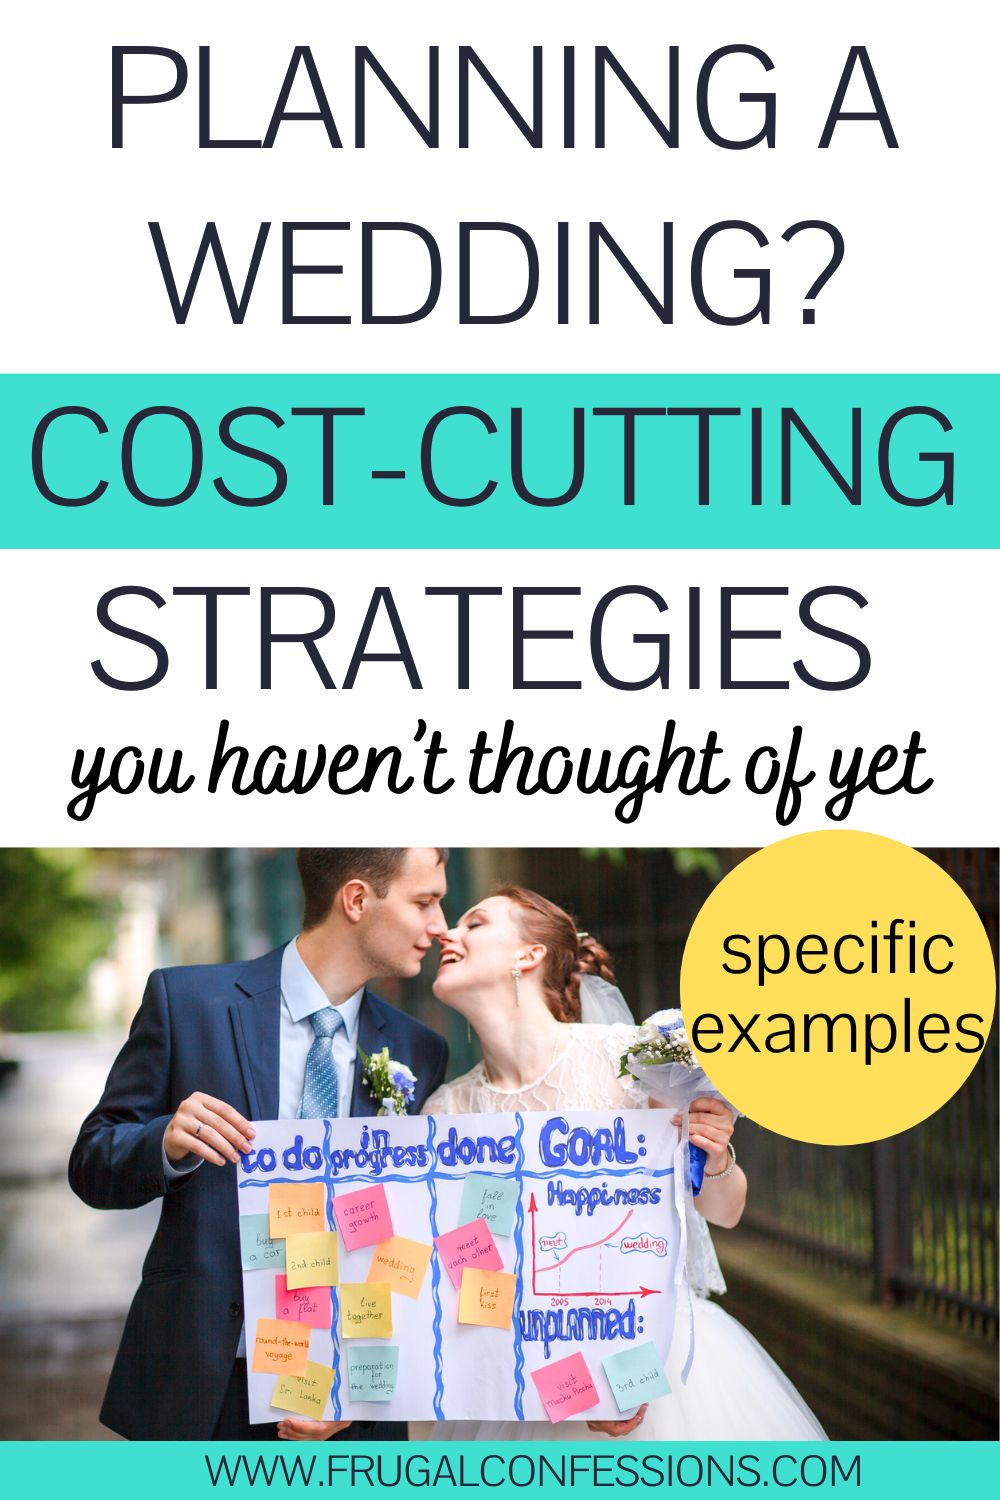 couple just having gotten married with to do planning sign crossed off, text overlay "planning a wedding? cost-cutting strategies"